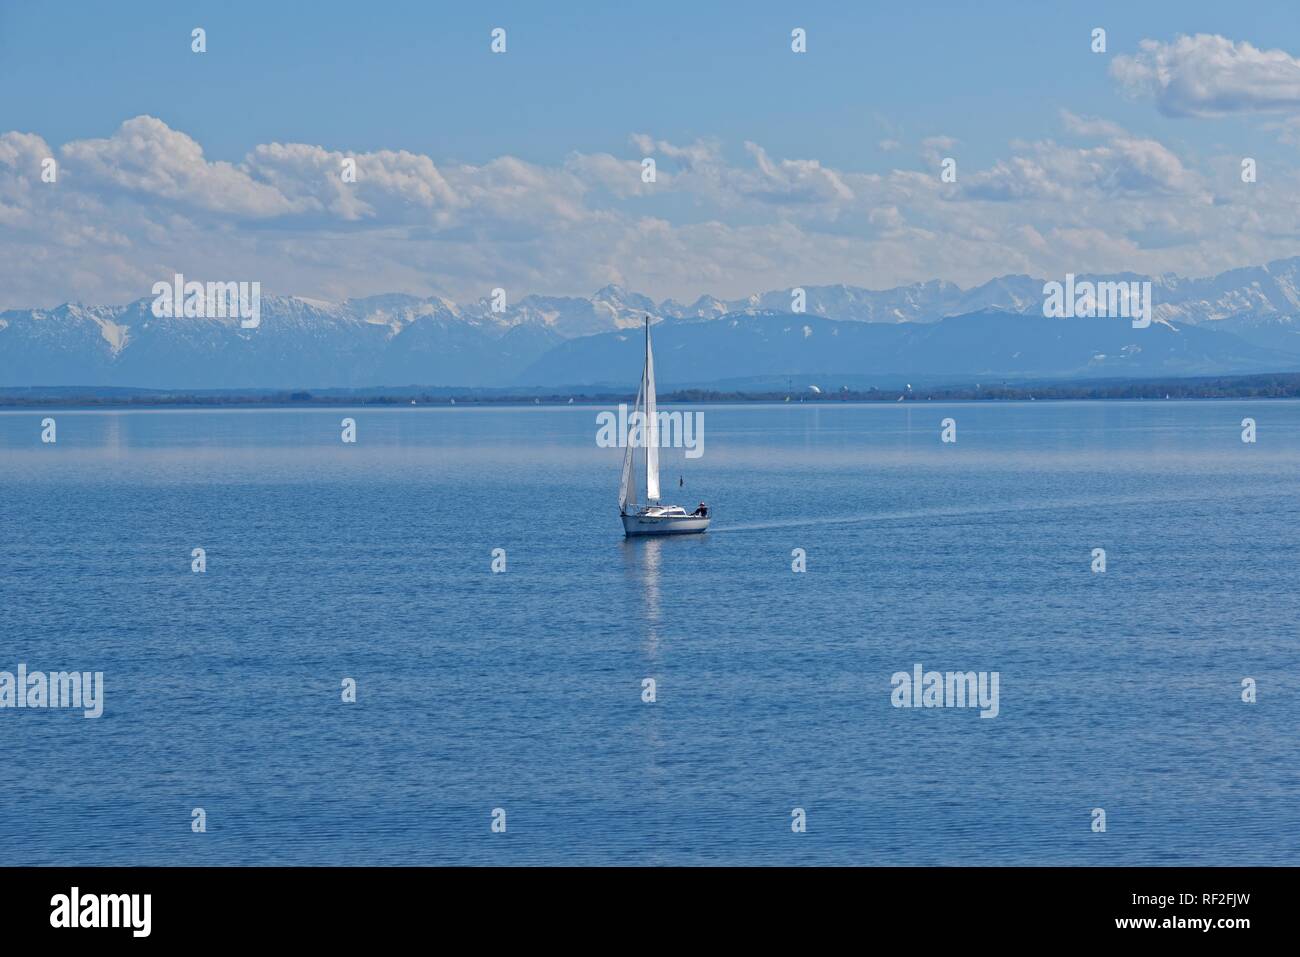 Lake Ammer with sailboat and the snow-covered Alpine peaks in the background, Lake Ammer, Herrsching, Bavaria, Germany Stock Photo